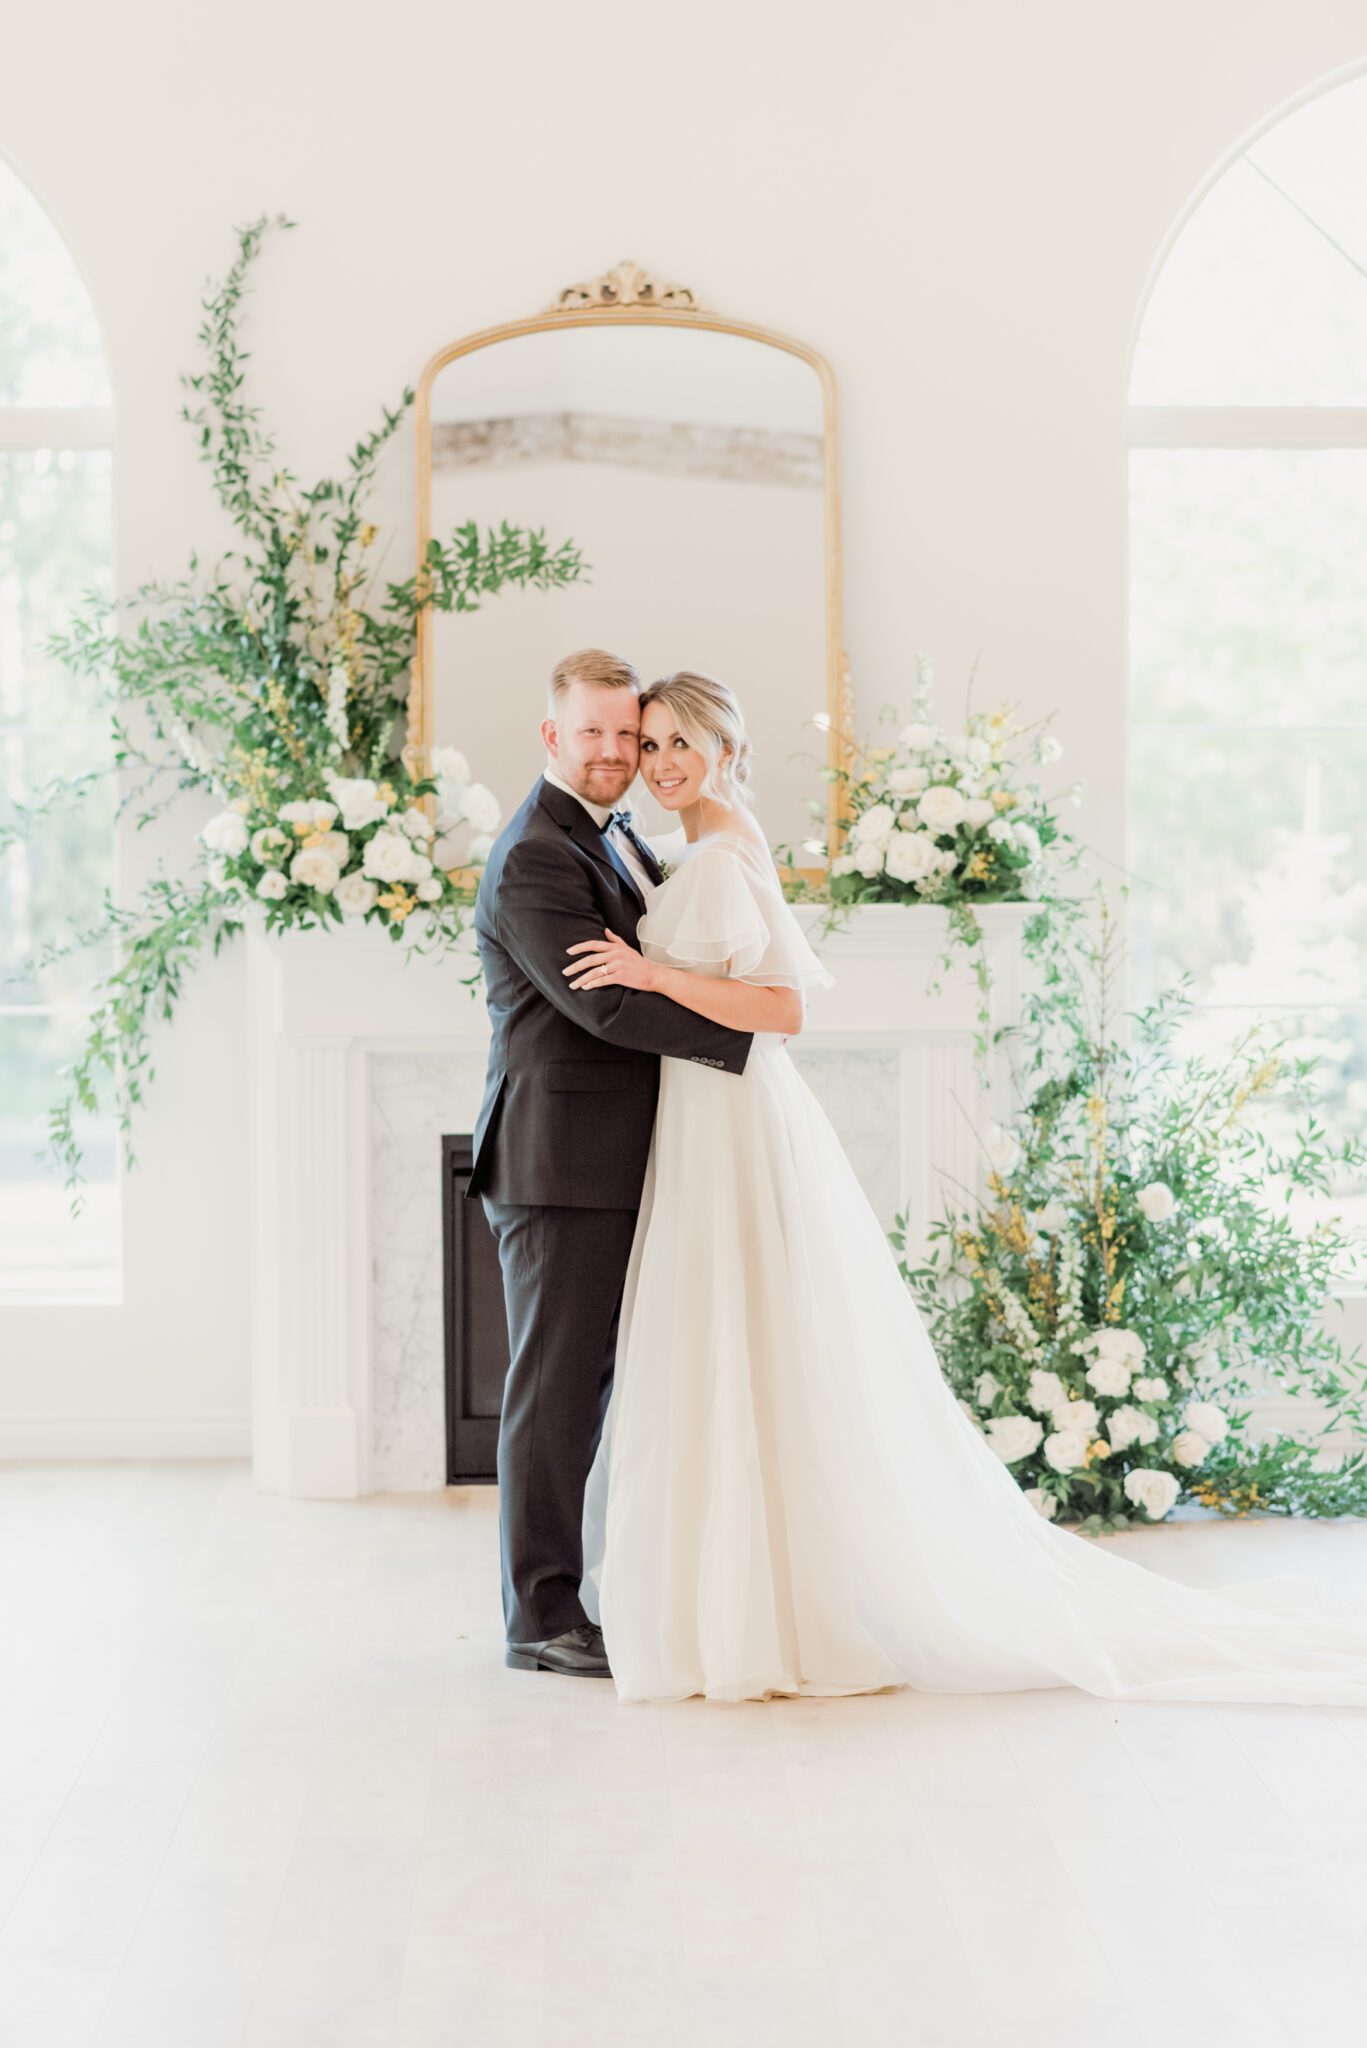 Bride and groom during fine art Indoor wedding ceremony at Sparrow Lane with a lush floral installation climbing up the fireplace. Pale yellow, ivory, white, colour palette. Bride wearing a whimsical yet sophisticated bridal gown.